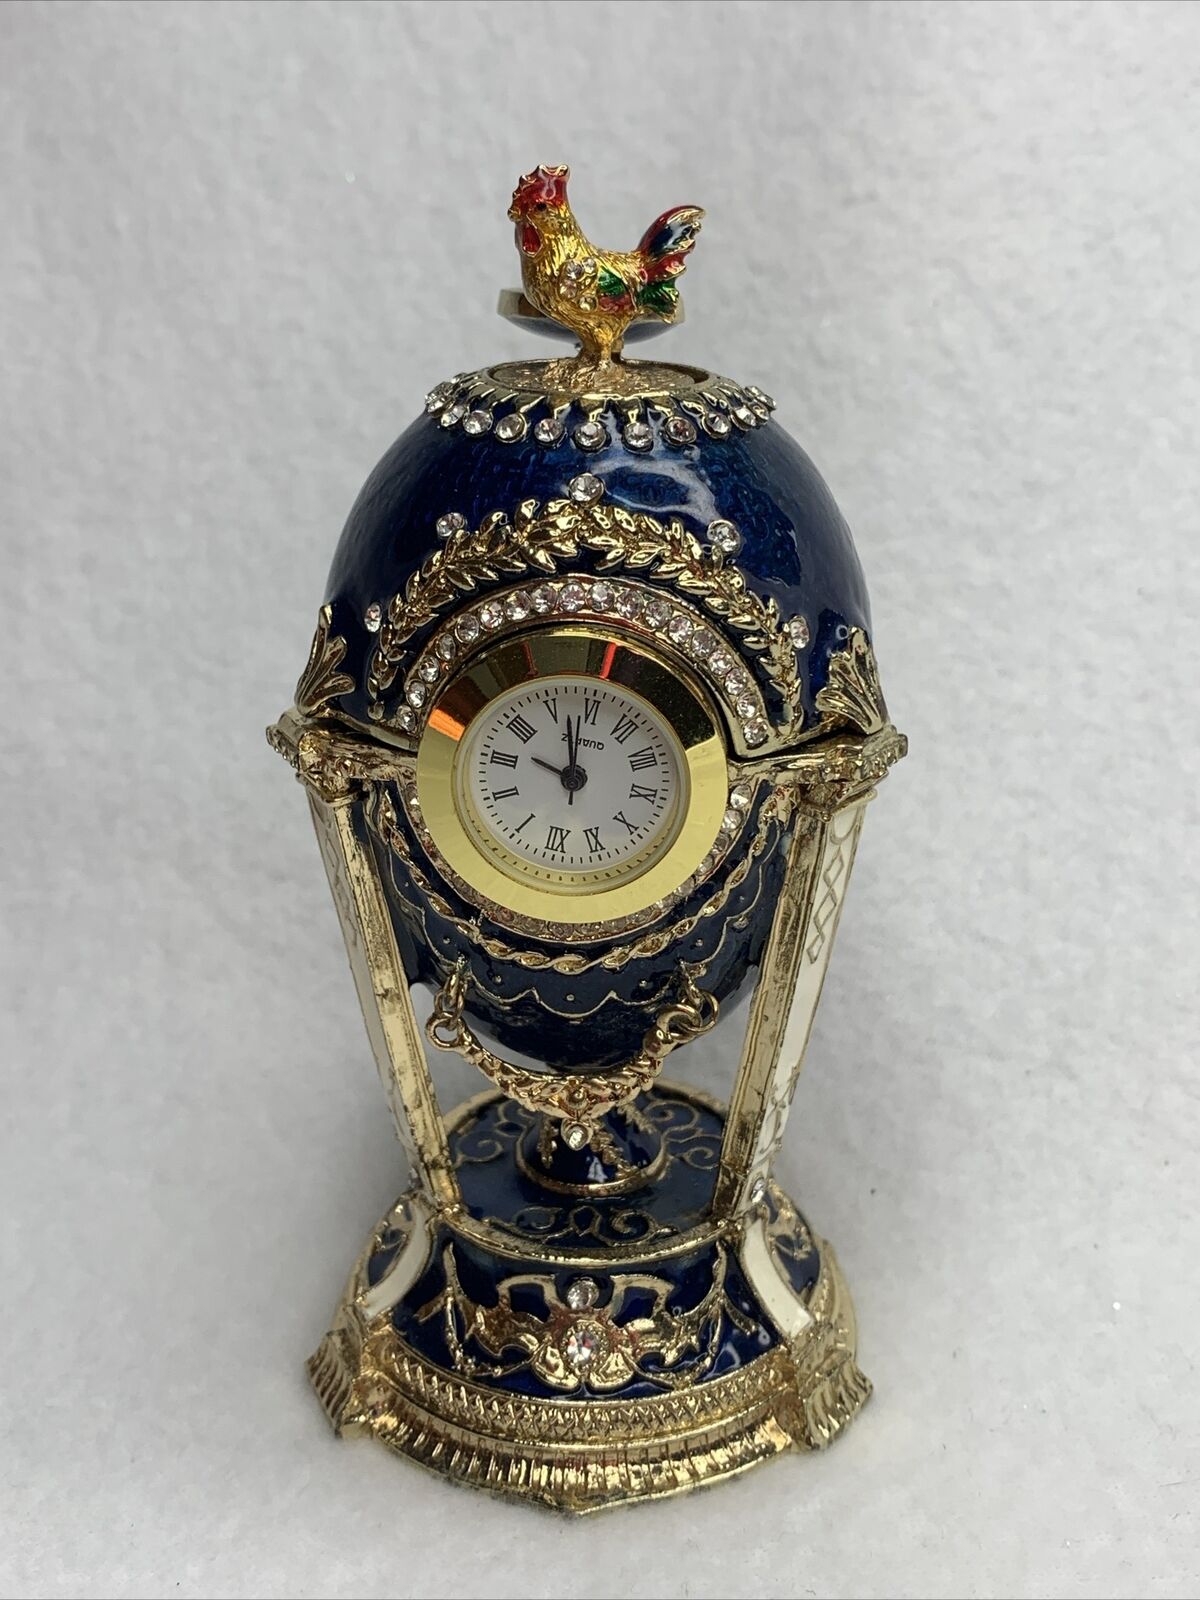 Brand New 1900 Cockerel Royal Imperial Easter Egg in Blue in Gift Box